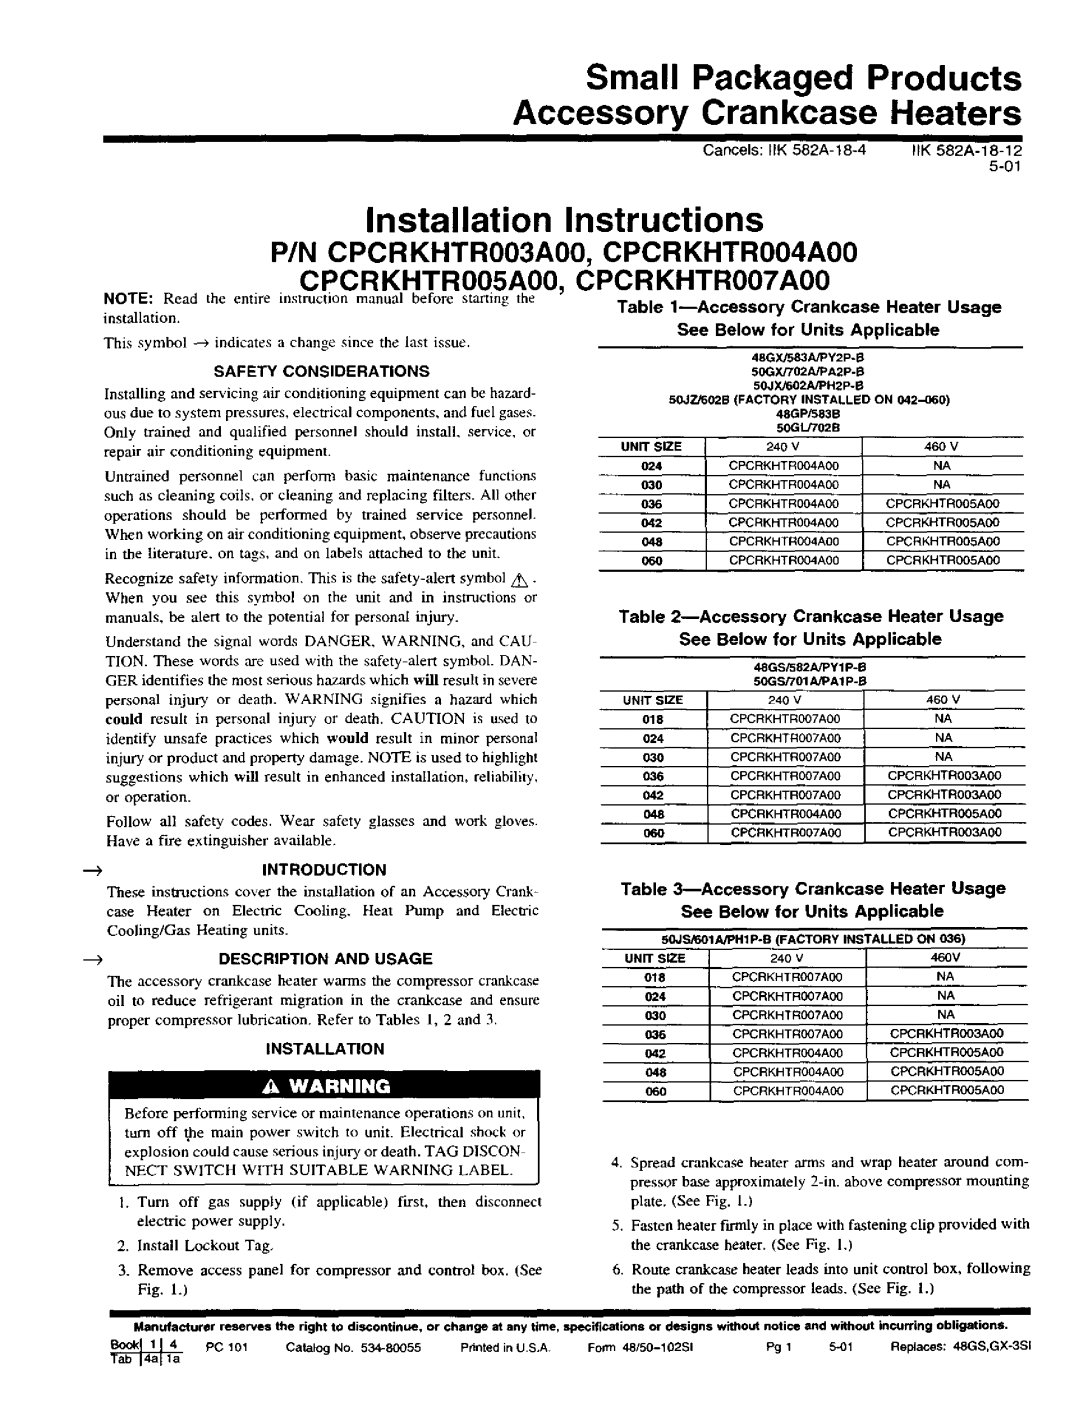 Sears CPCRKHTR003A00 installation instructions Accessory Crankcase Heater Usage, See Below for Units Applicable, 5-01 